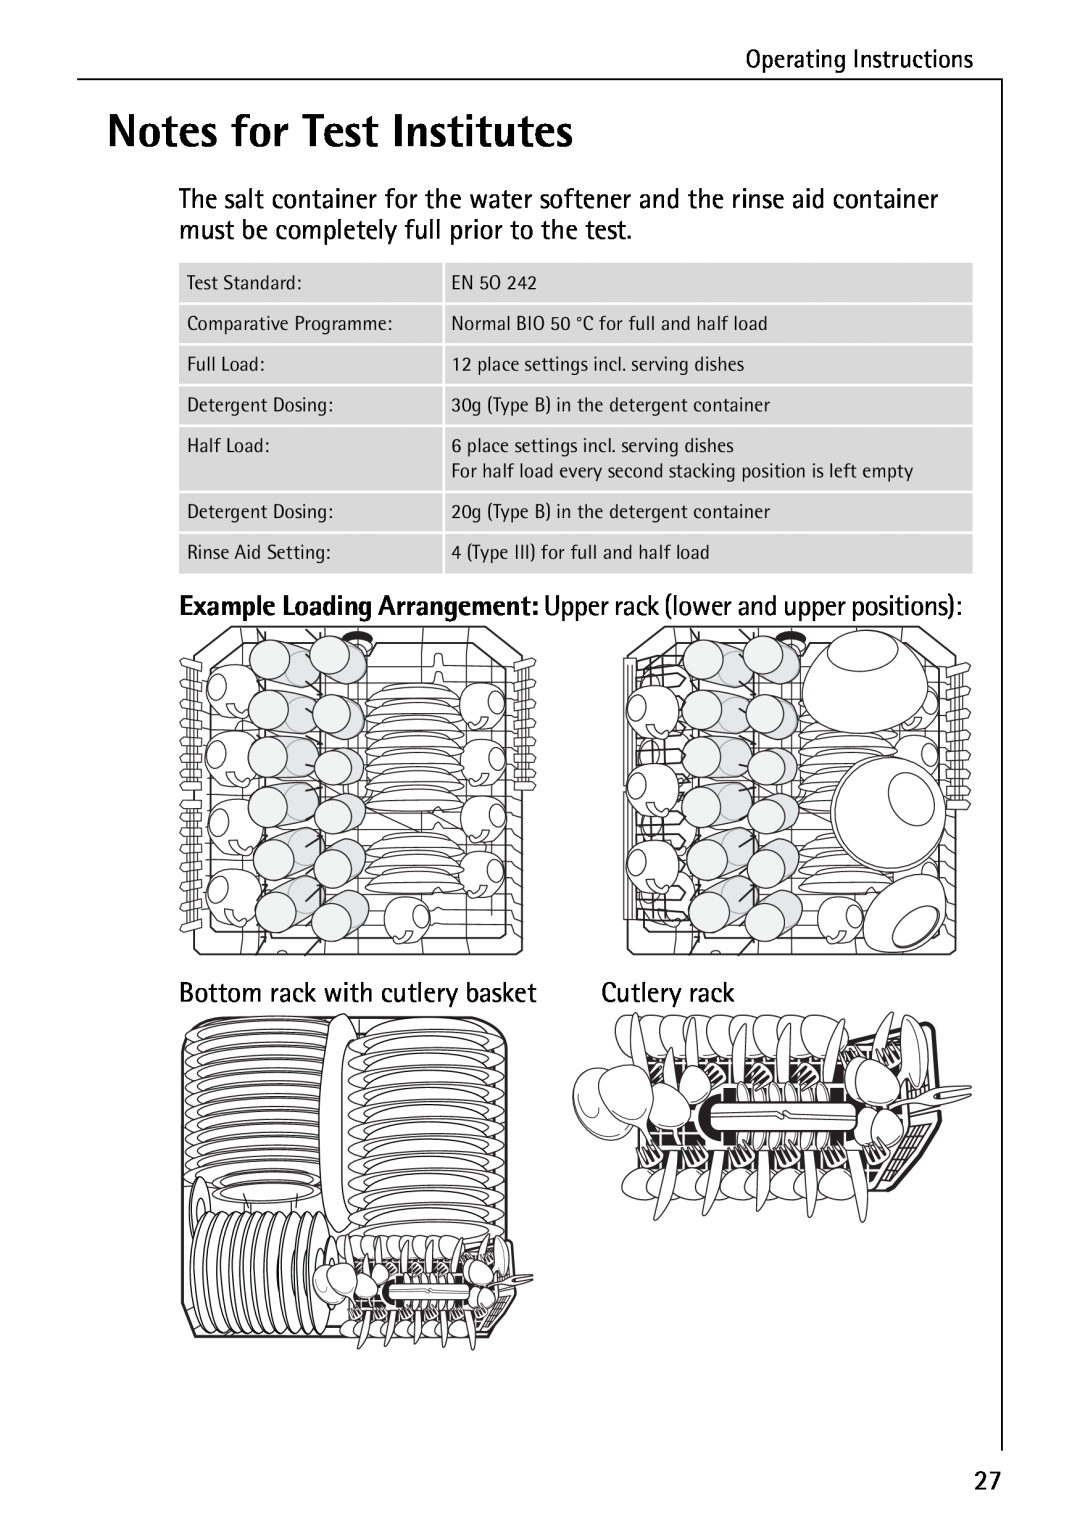 Electrolux 40250 i manual Notes for Test Institutes, Bottom rack with cutlery basket, Operating Instructions 